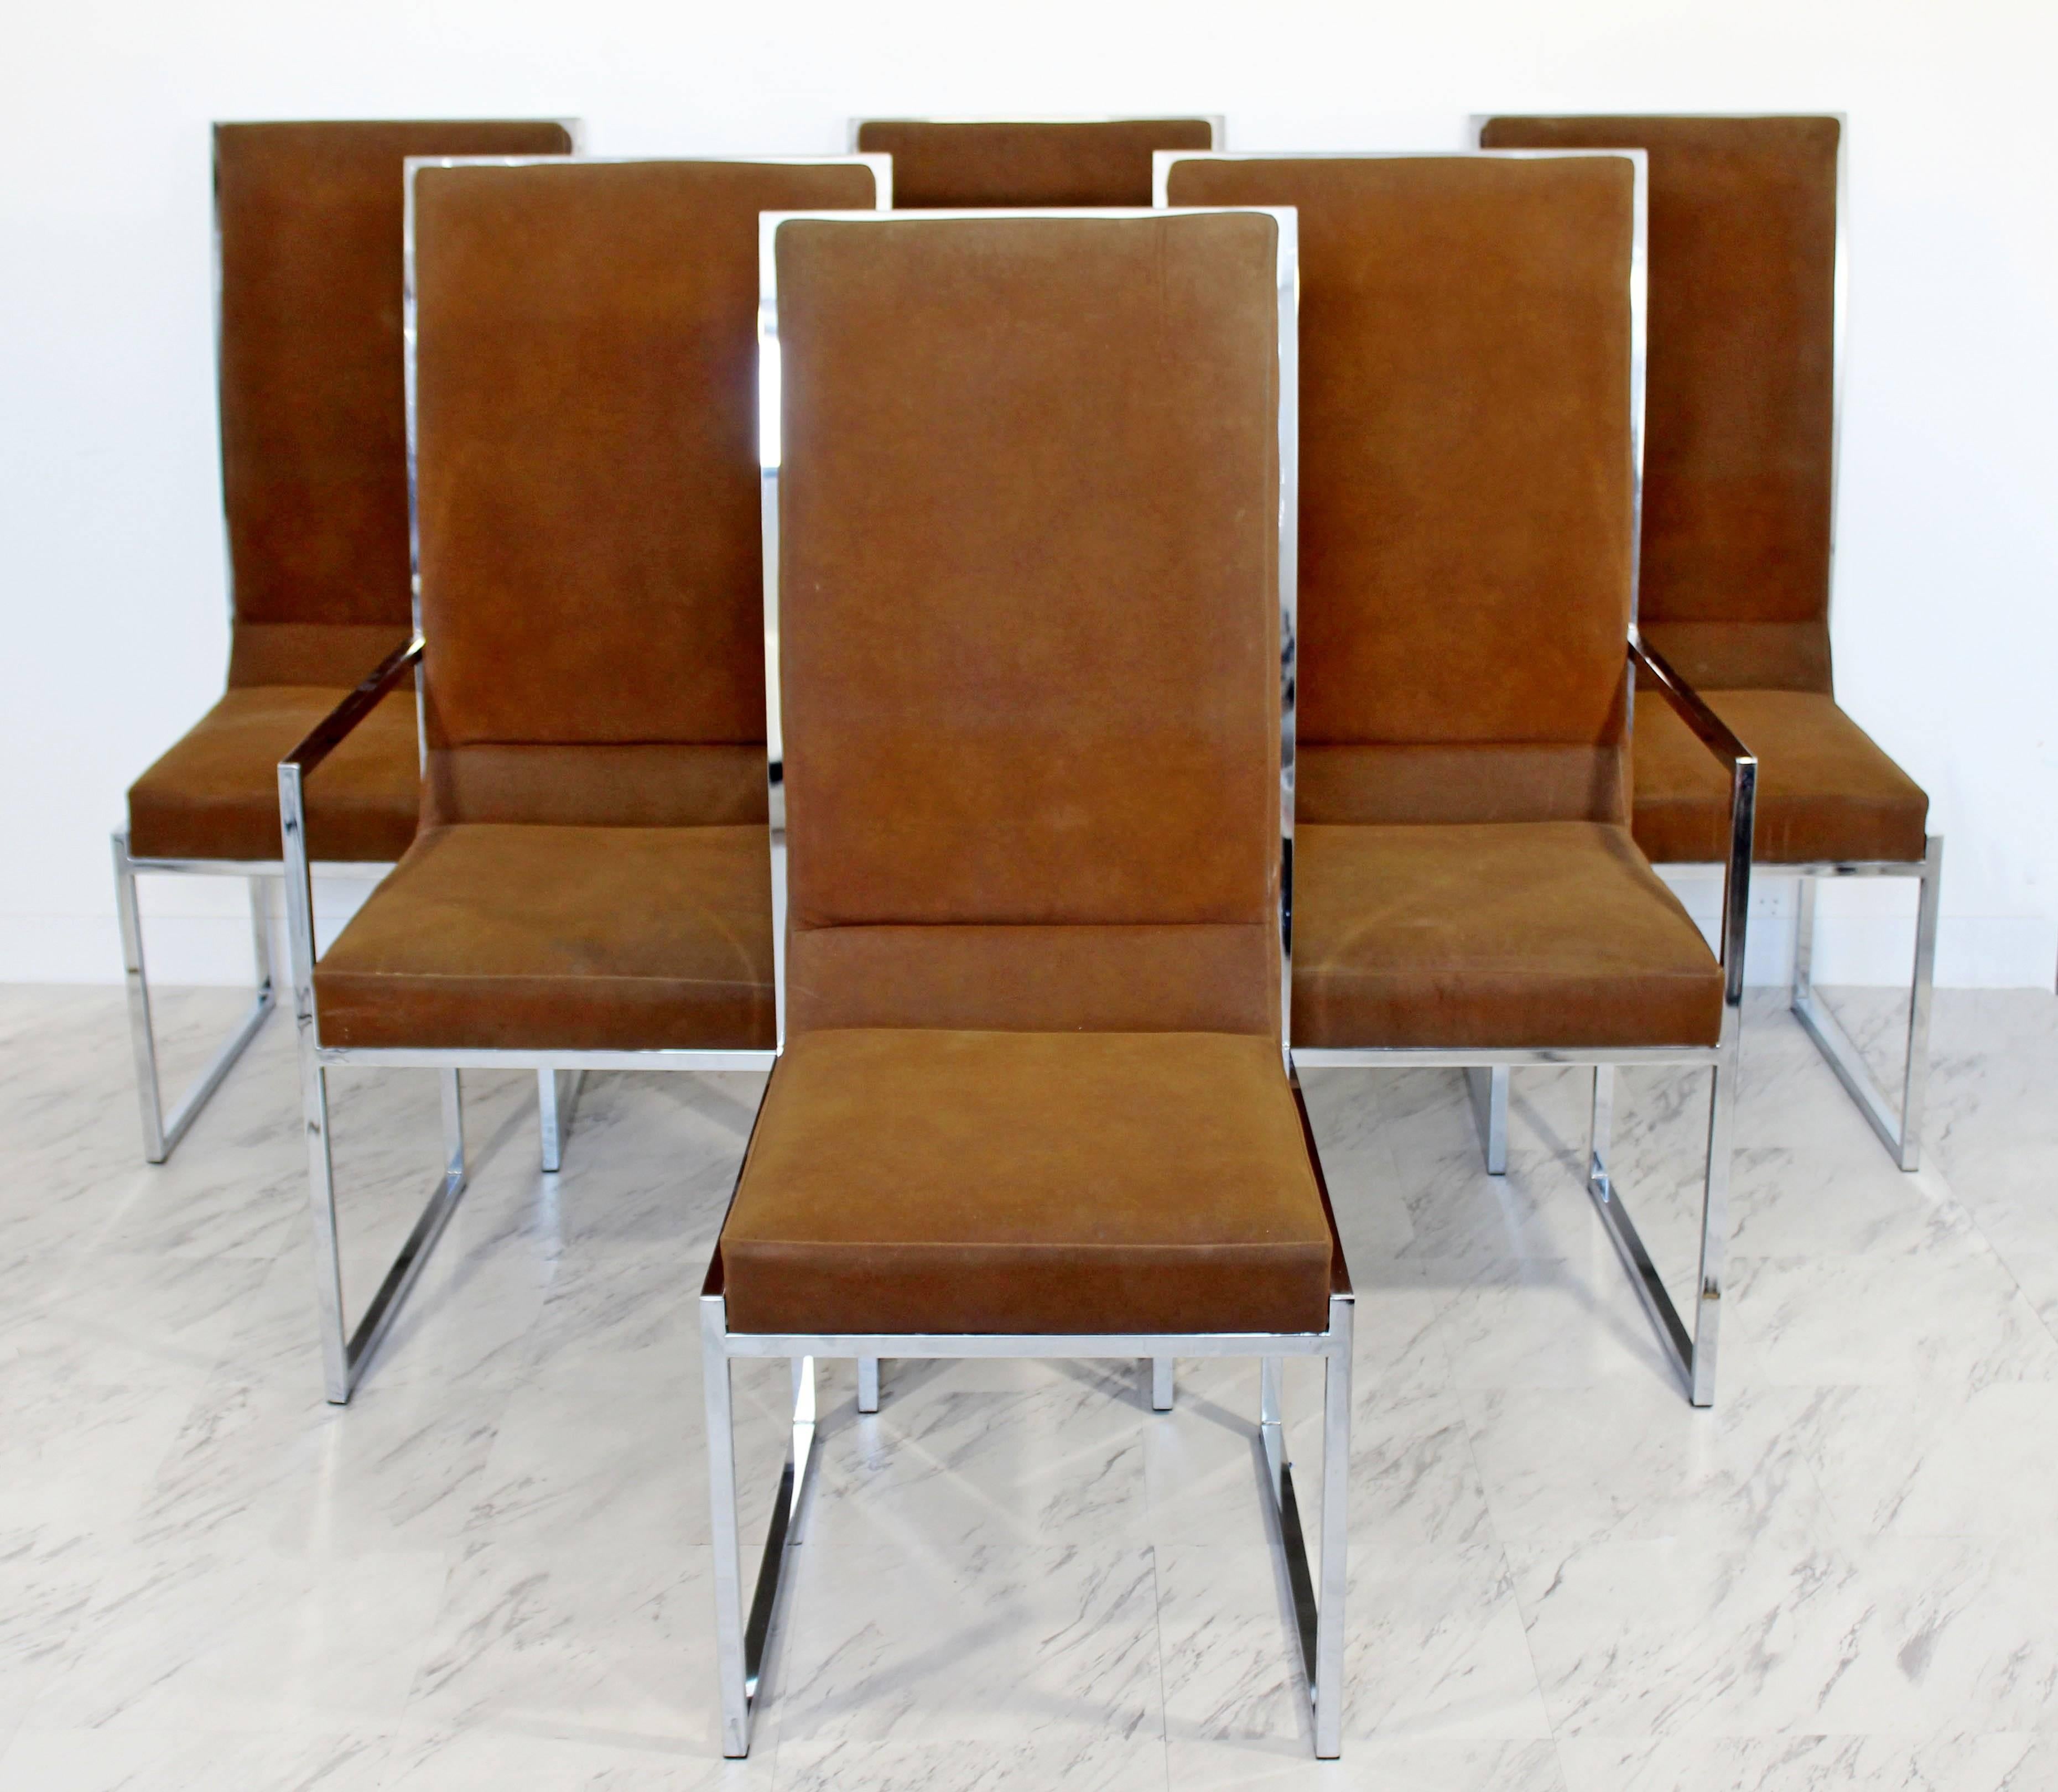 For your consideration is a magnificent set of six dining chairs, two arm and four side, by Milo Baughman for the Design Institute of America, circa the 1970s. Chrome bases are in excellent condition, but chairs can be used as is, but would benefit